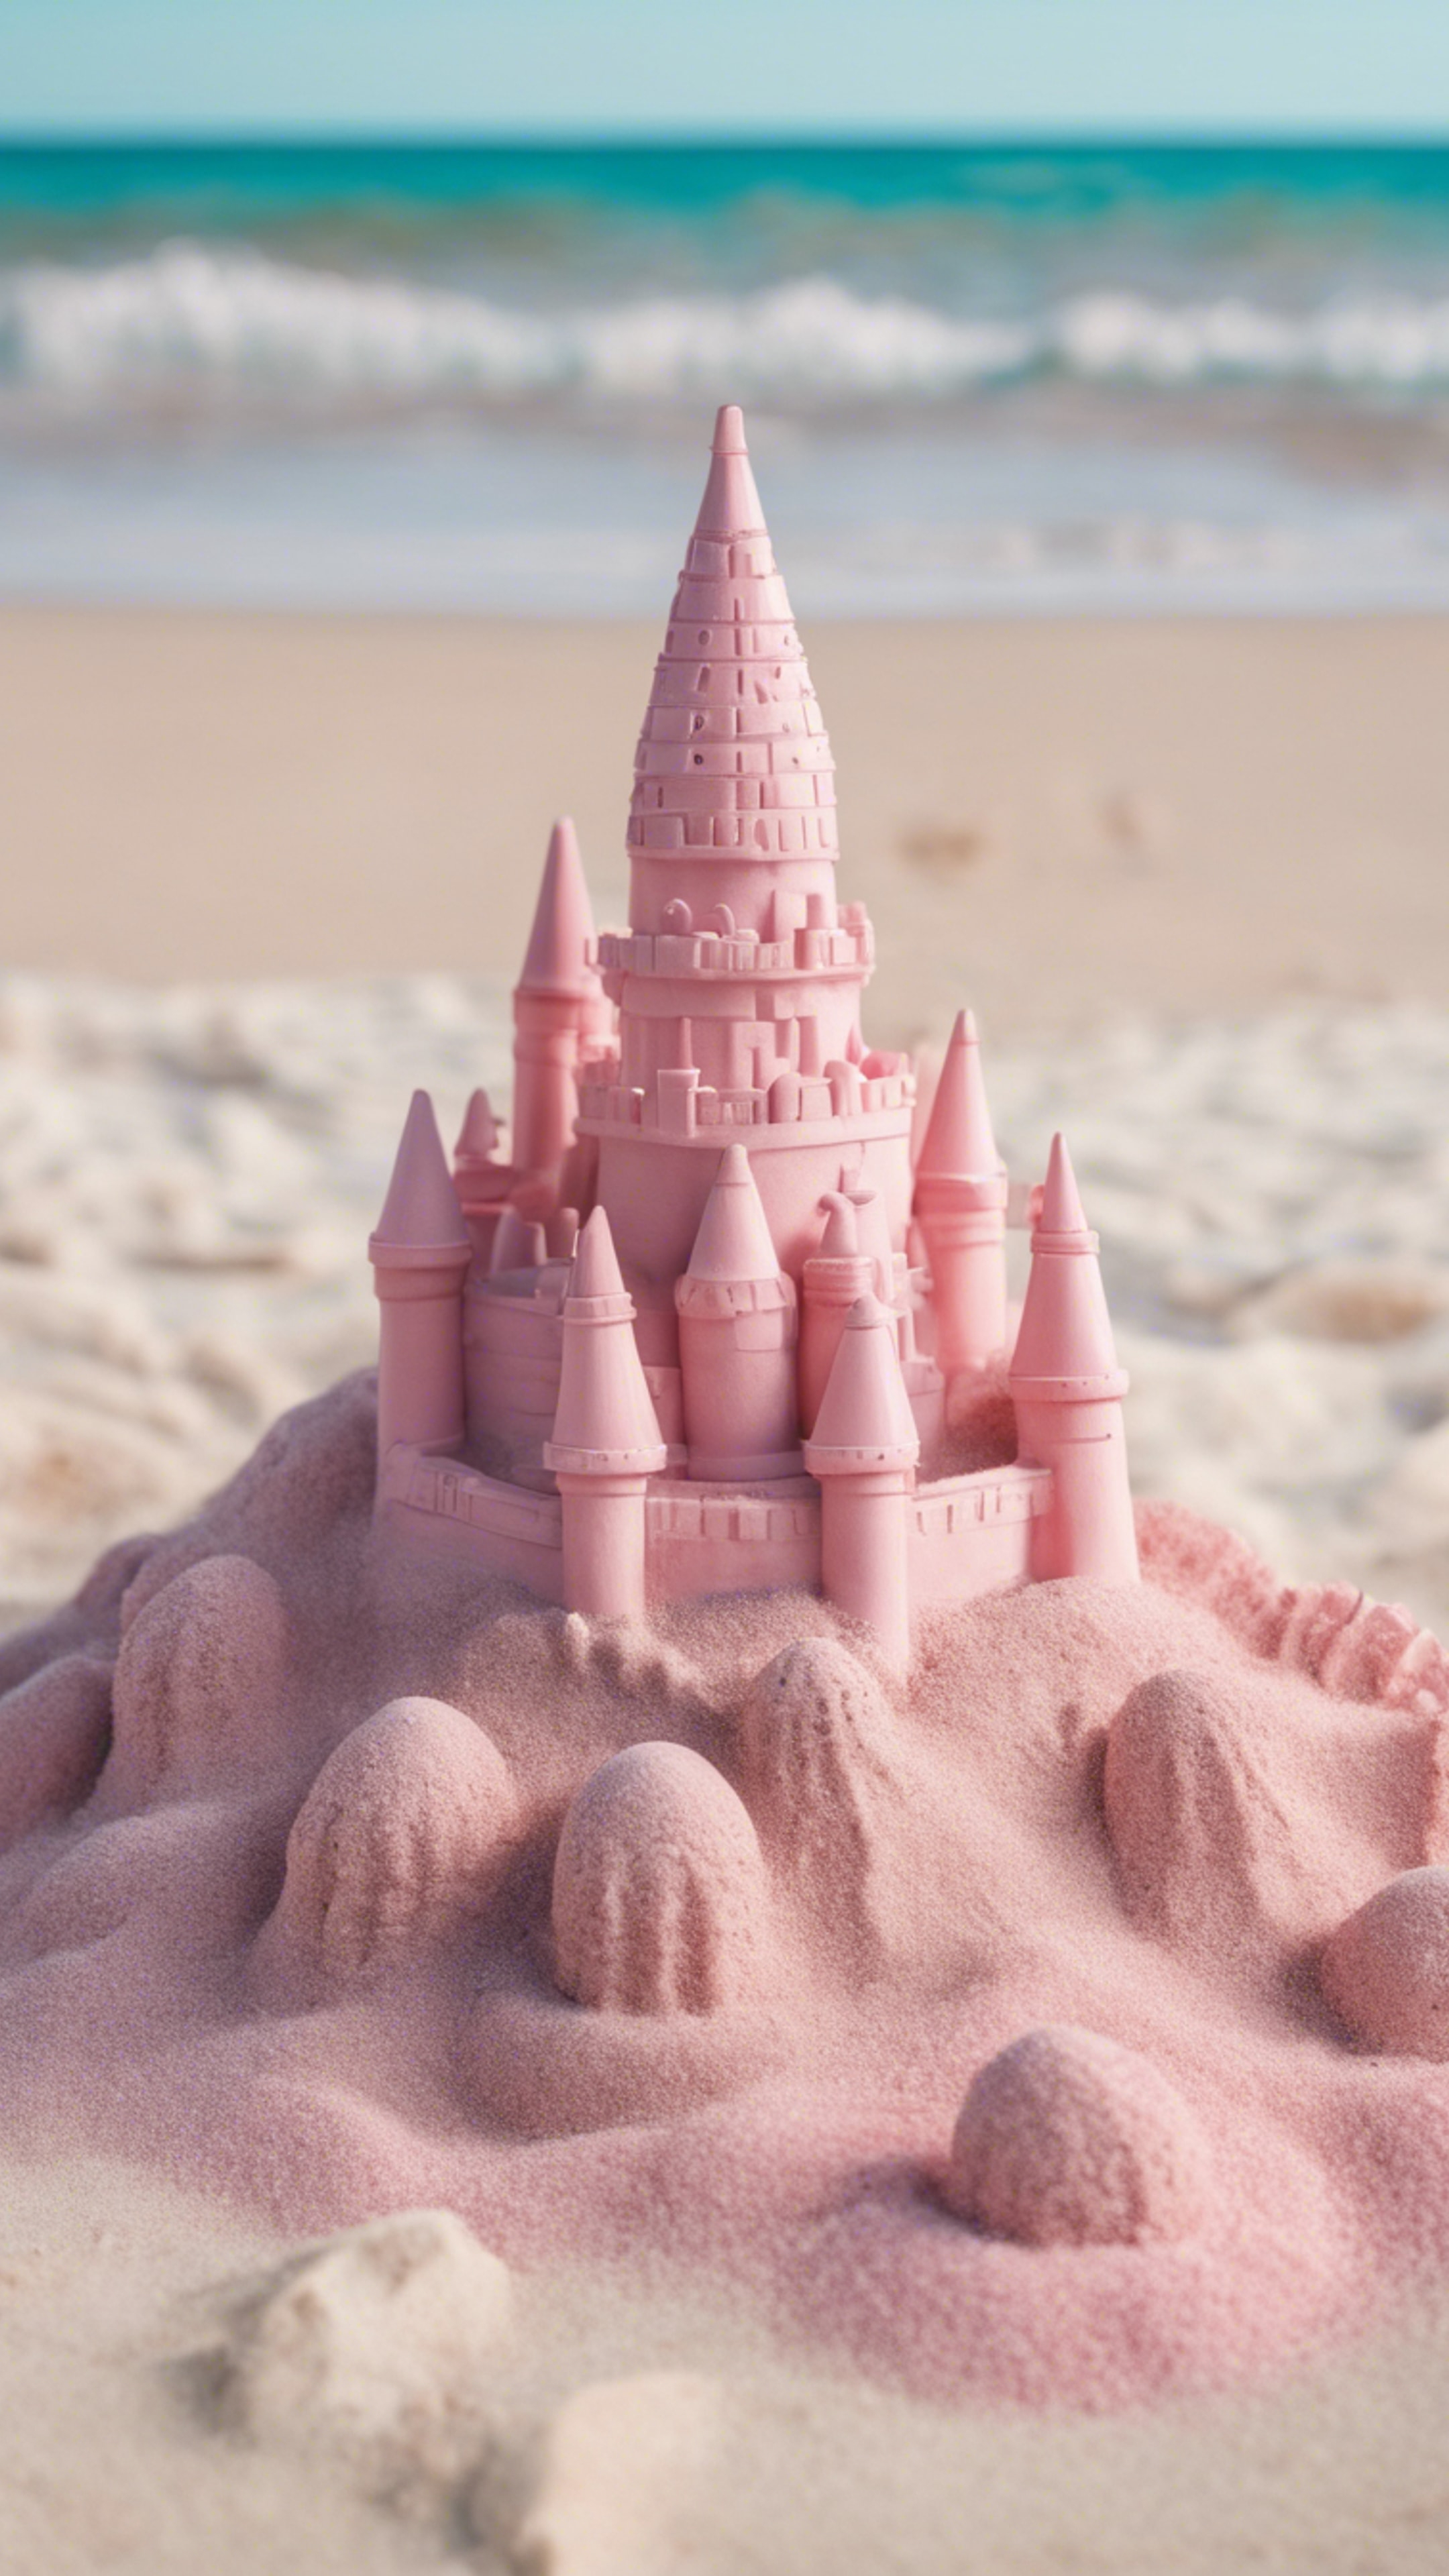 An intricate preppy pastel pink sandcastle on an idyllic beach with clear azure waters. Дэлгэцийн зураг[55e256d408524d5fa872]